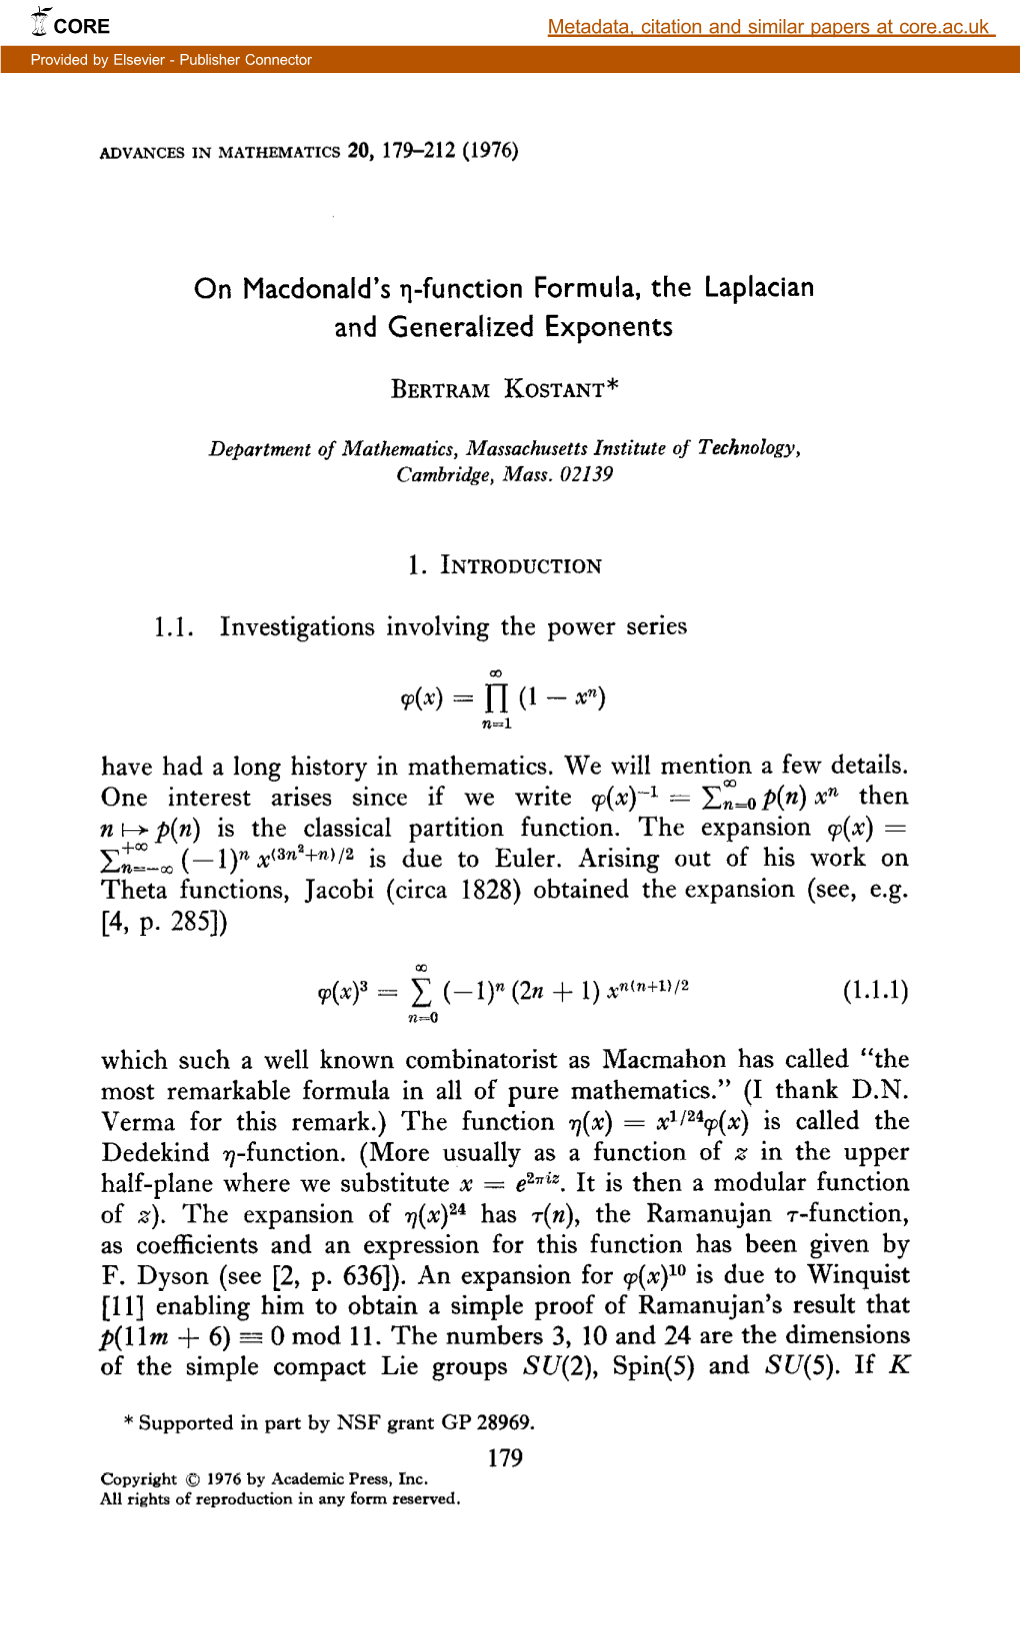 On Macdonald's Q-Function Formula, the Laplacian and Generalized